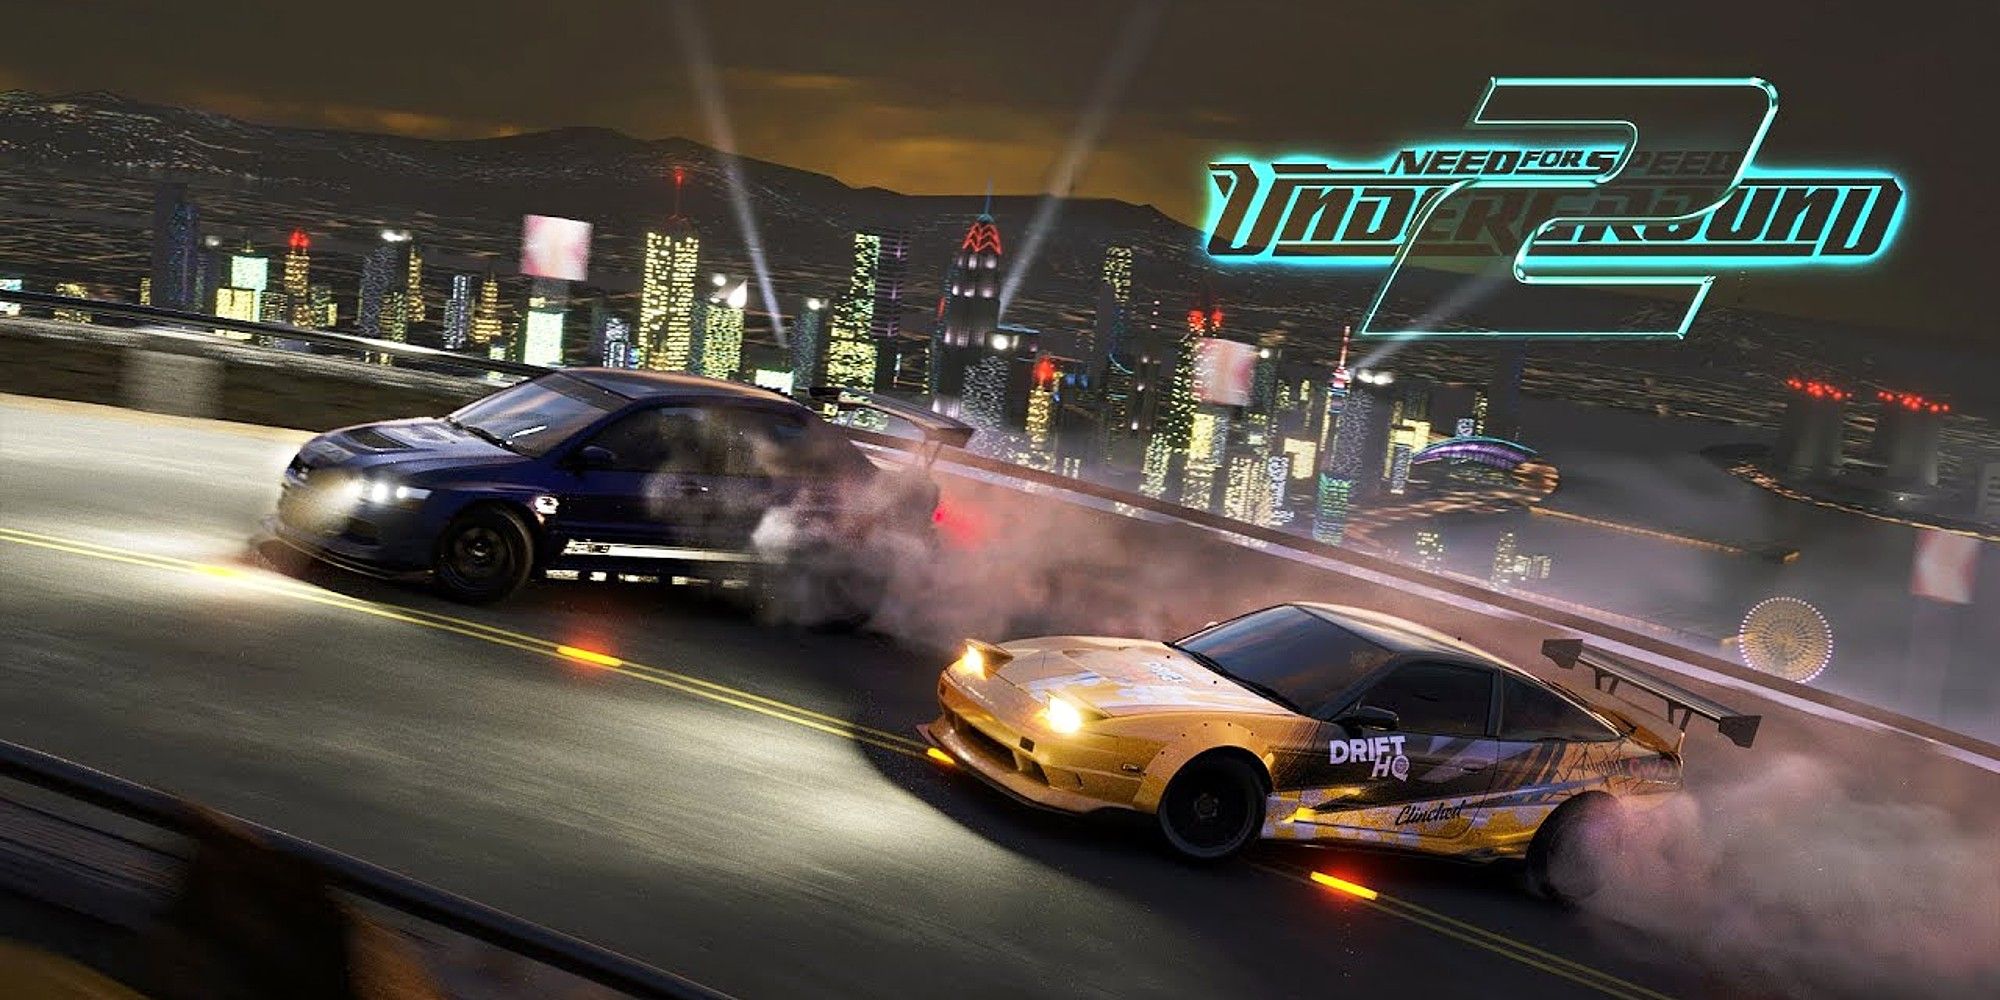 Need for Speed: Underground 2 - The Cutting Room Floor